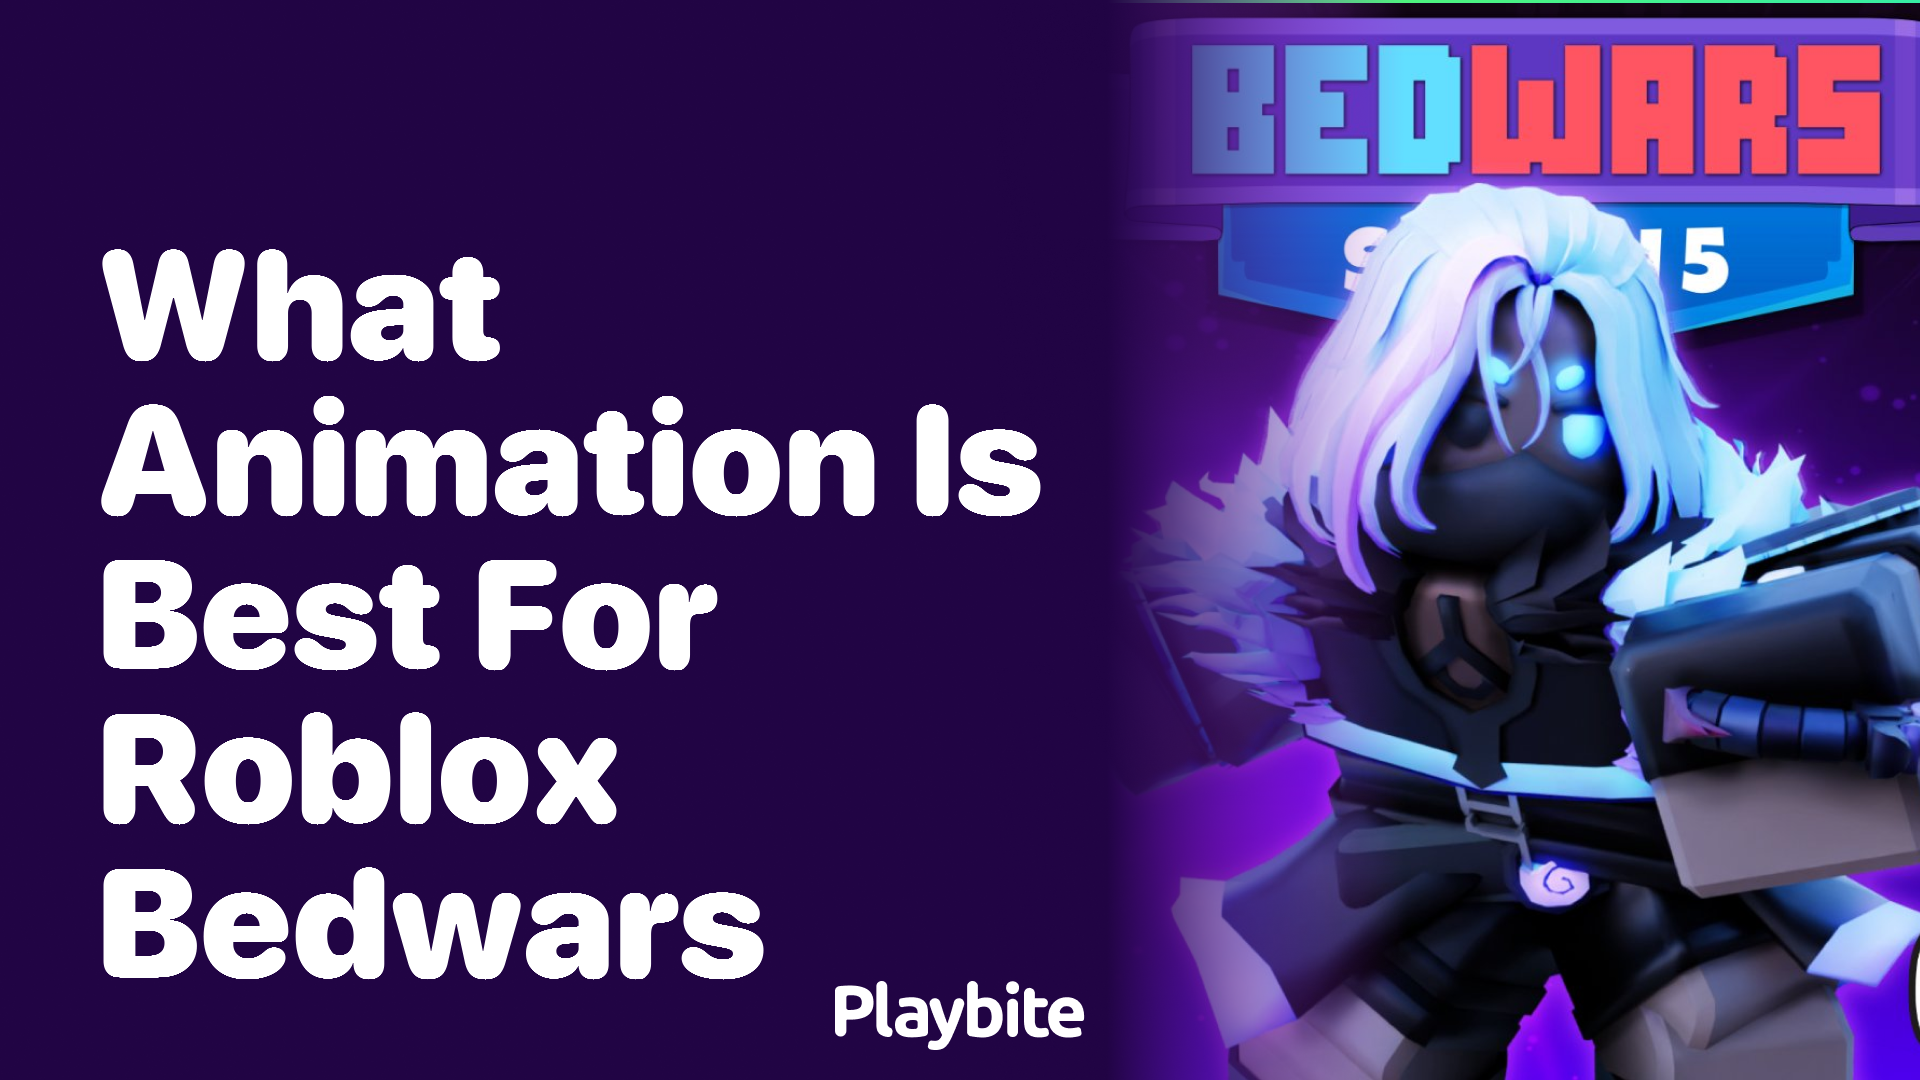 What Animation is Best for Roblox Bedwars?